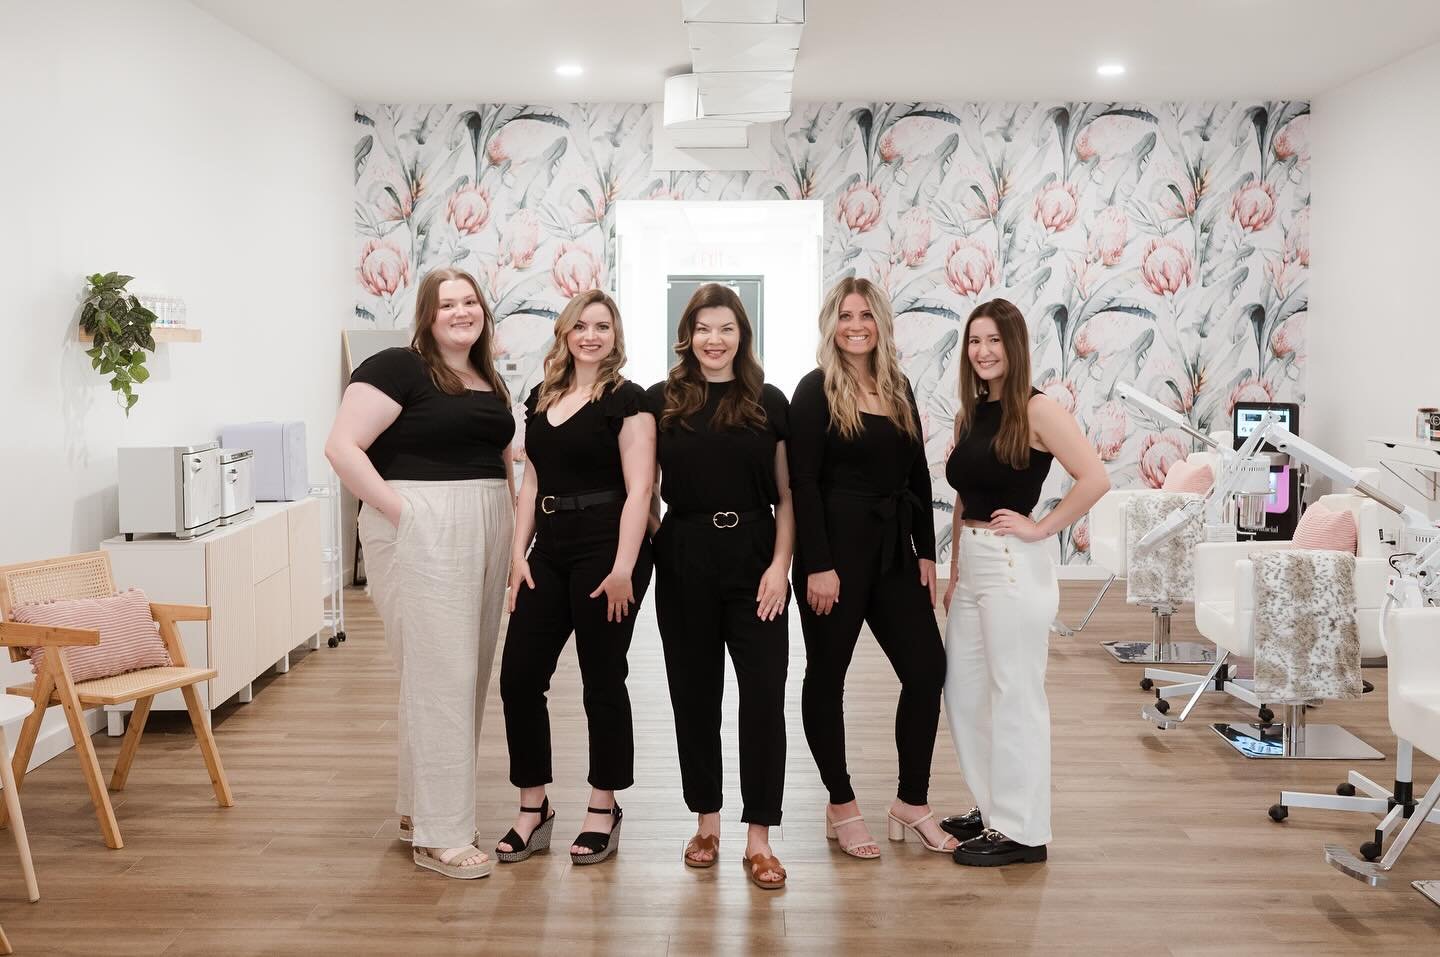 I had an absolute blast doing a brand session for my dear friend @kolevski_love at @oasisfacebarpickerington. She has the most beautiful space here in Pickerington for your facial needs. I love seeing her business thrive in our community. If you have